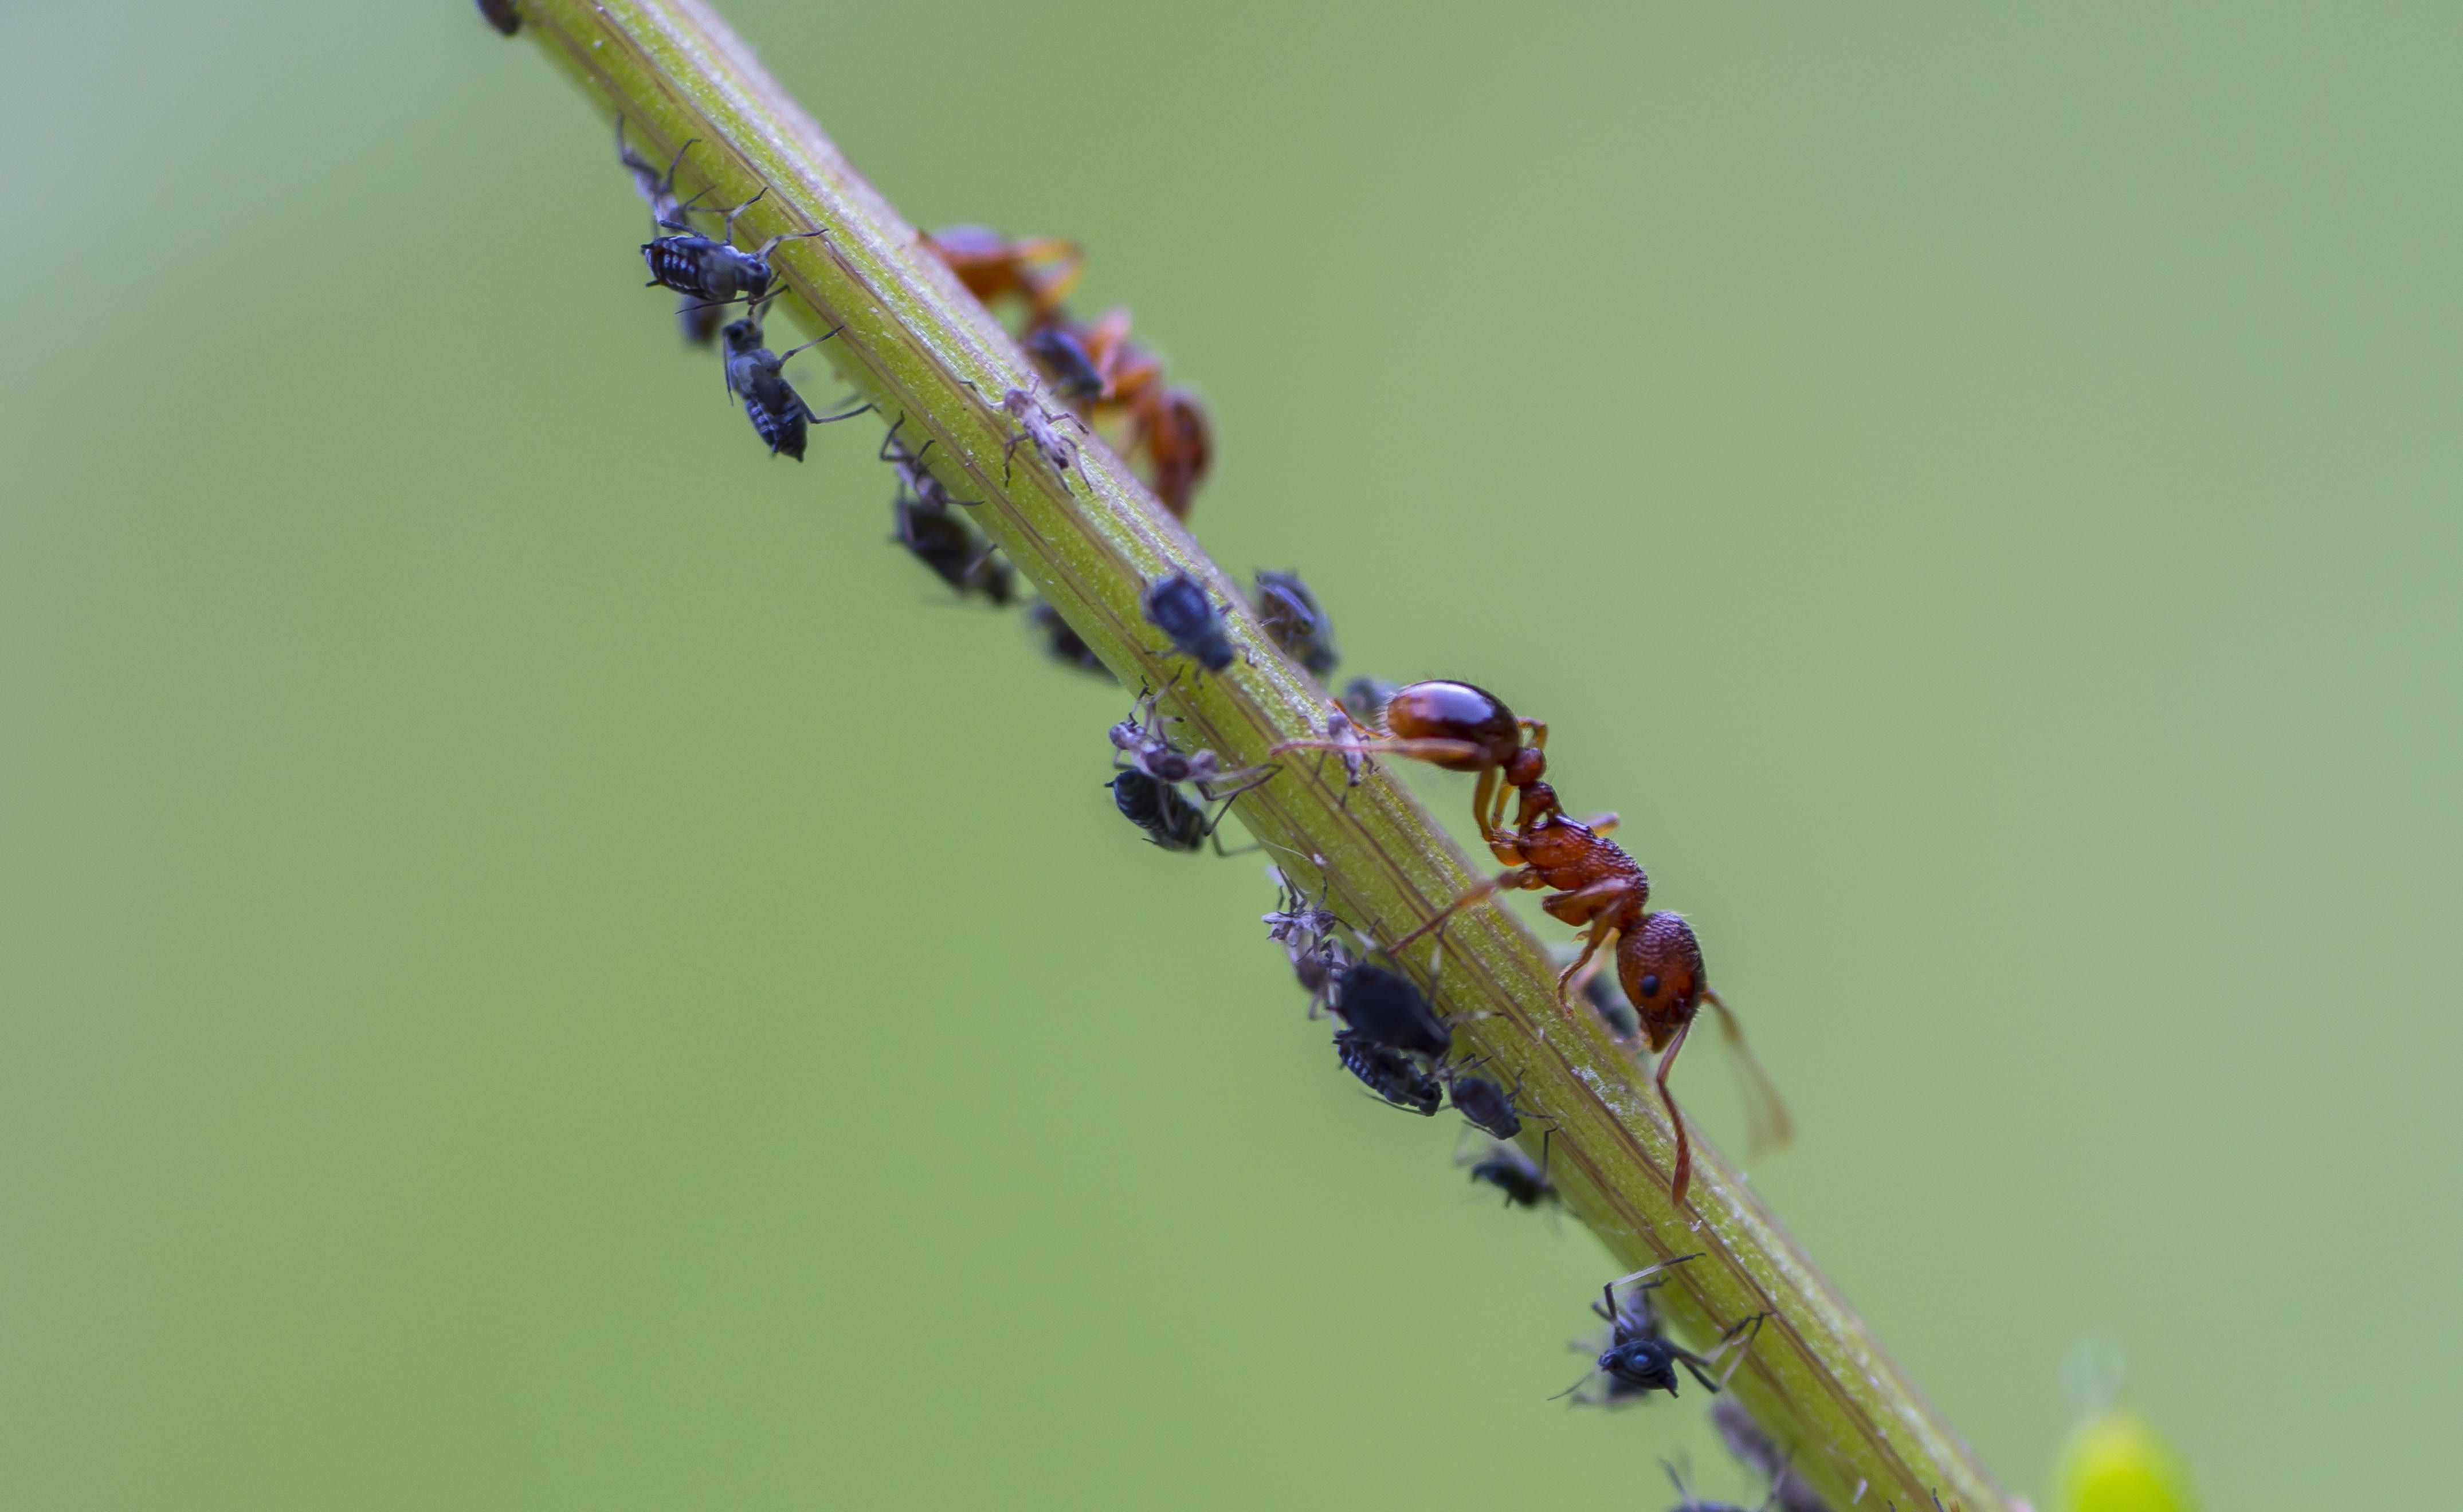 red and black ants on plant, red ant, louse, lice, aphid, infestation